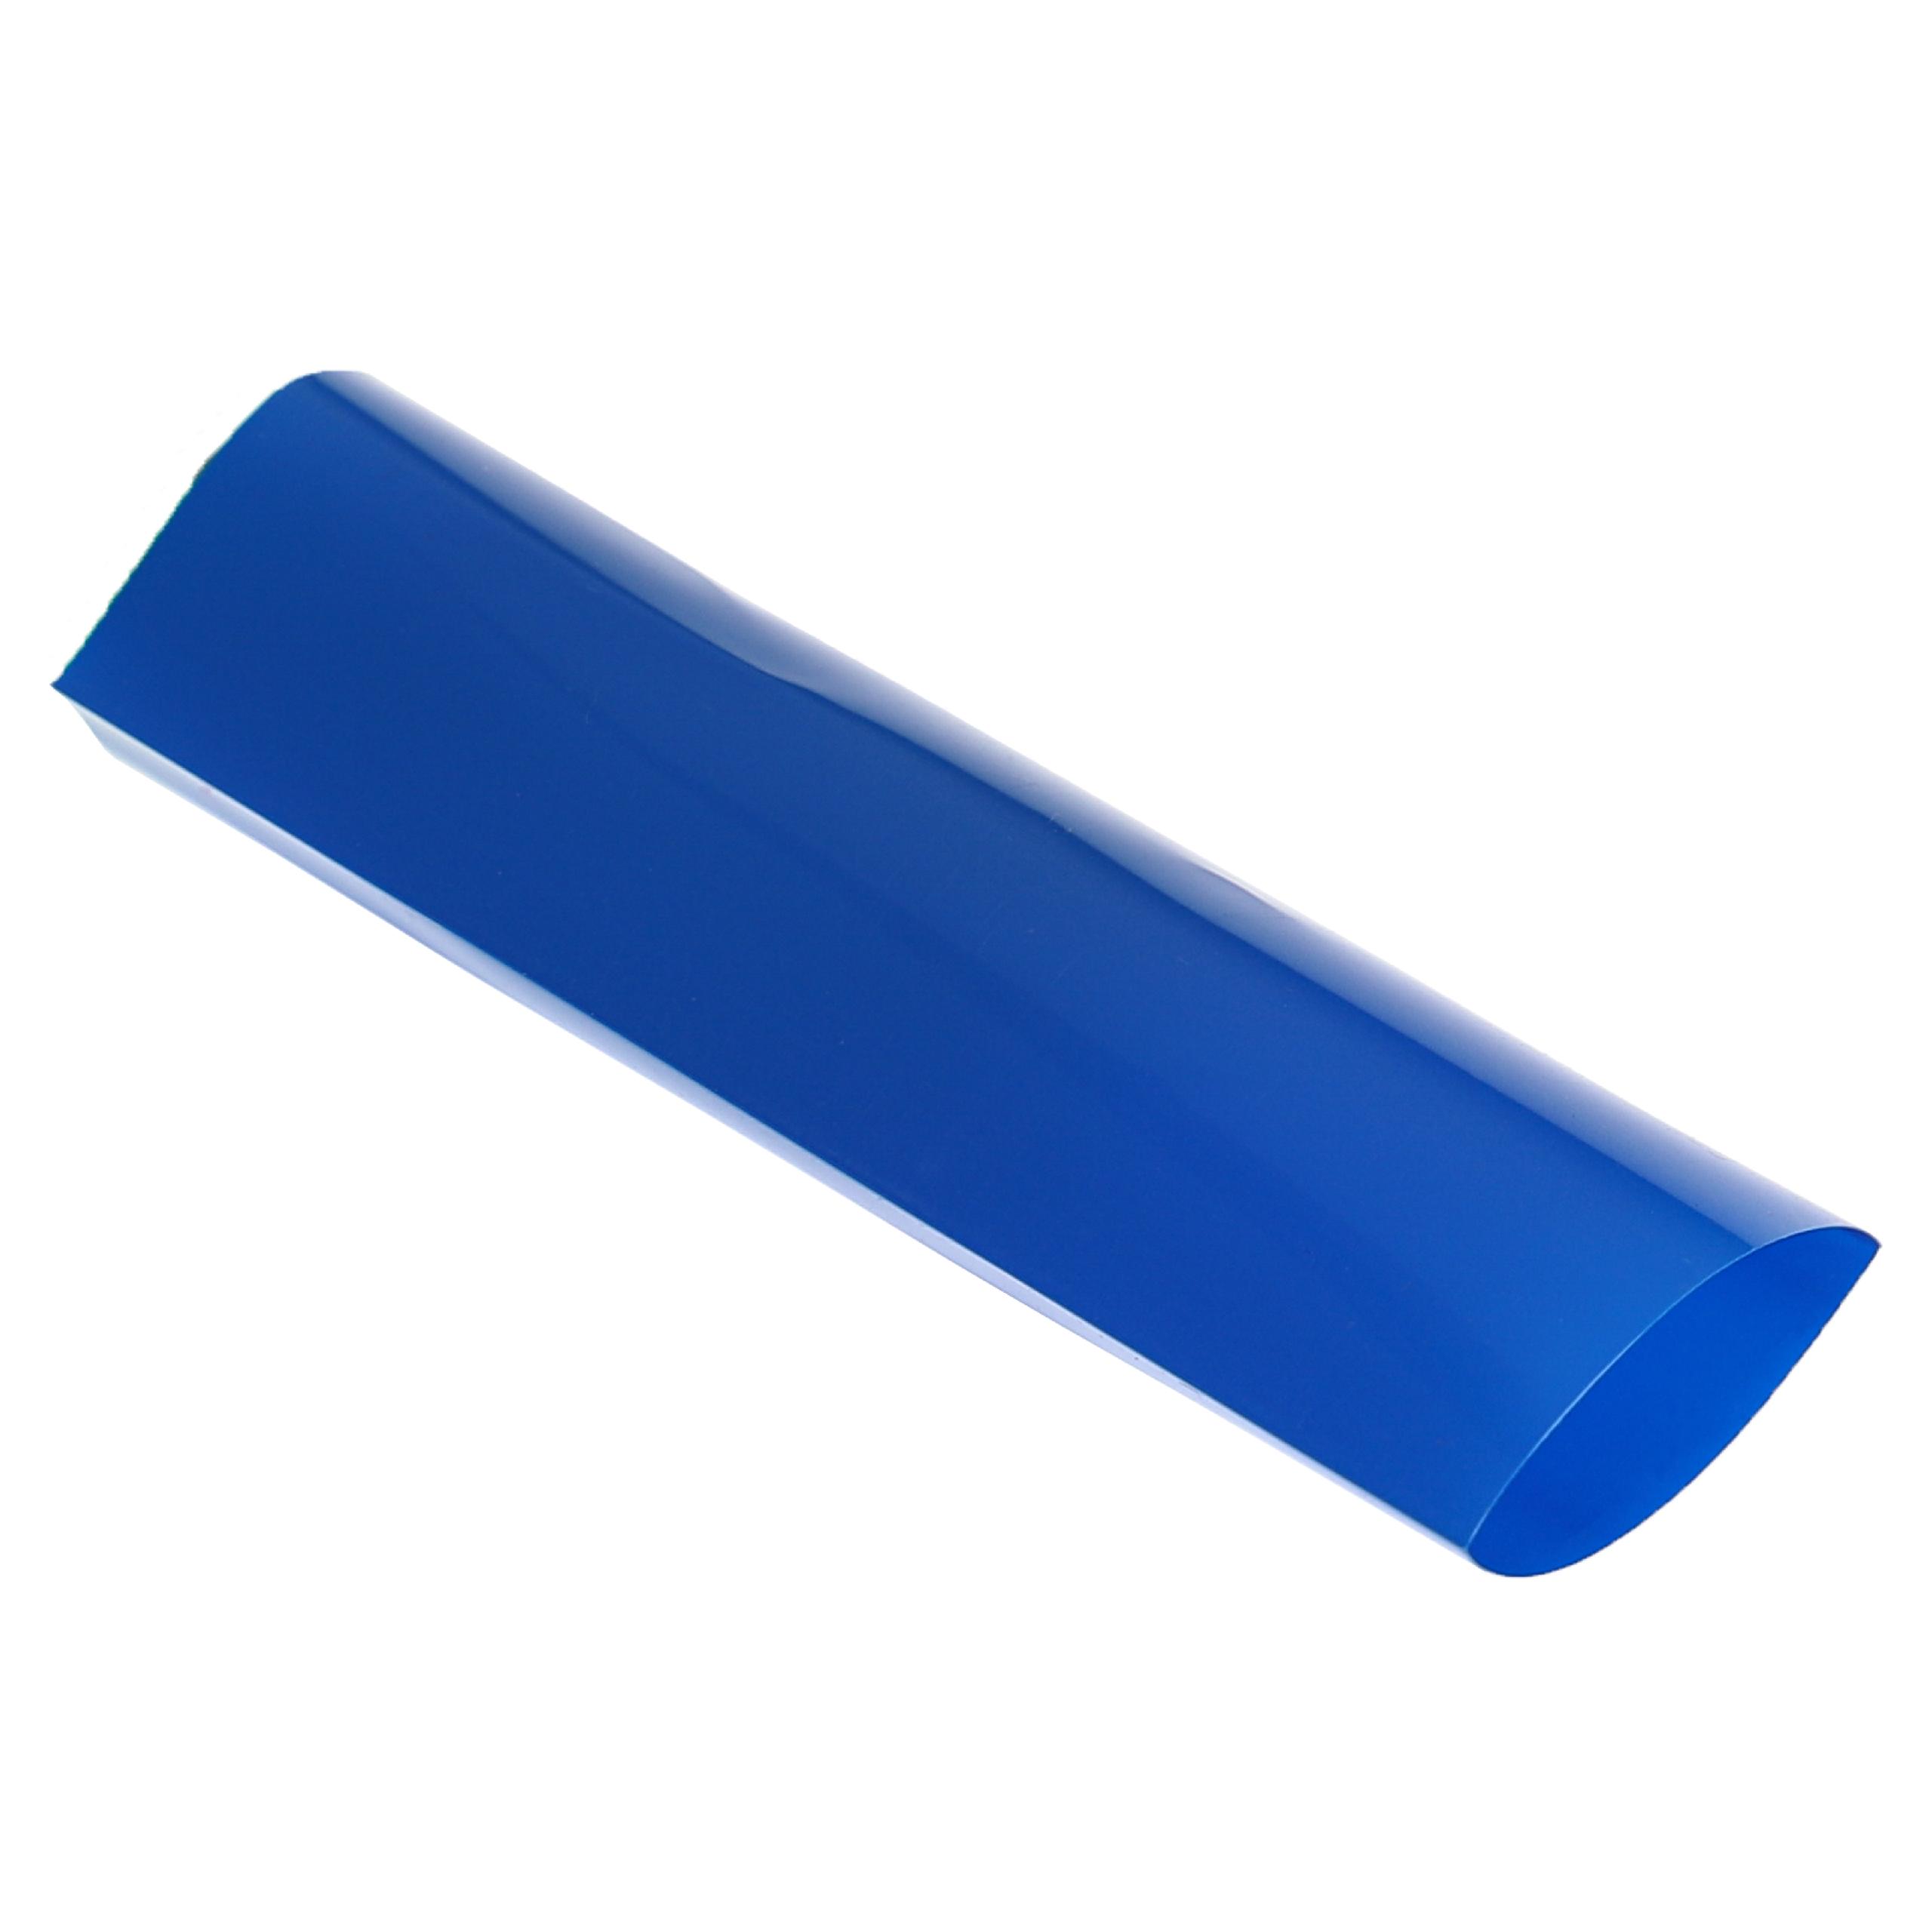 10x Heat Shrink Tubing Suitable for 18650 Battery Cells - Shrink Wrap Blue